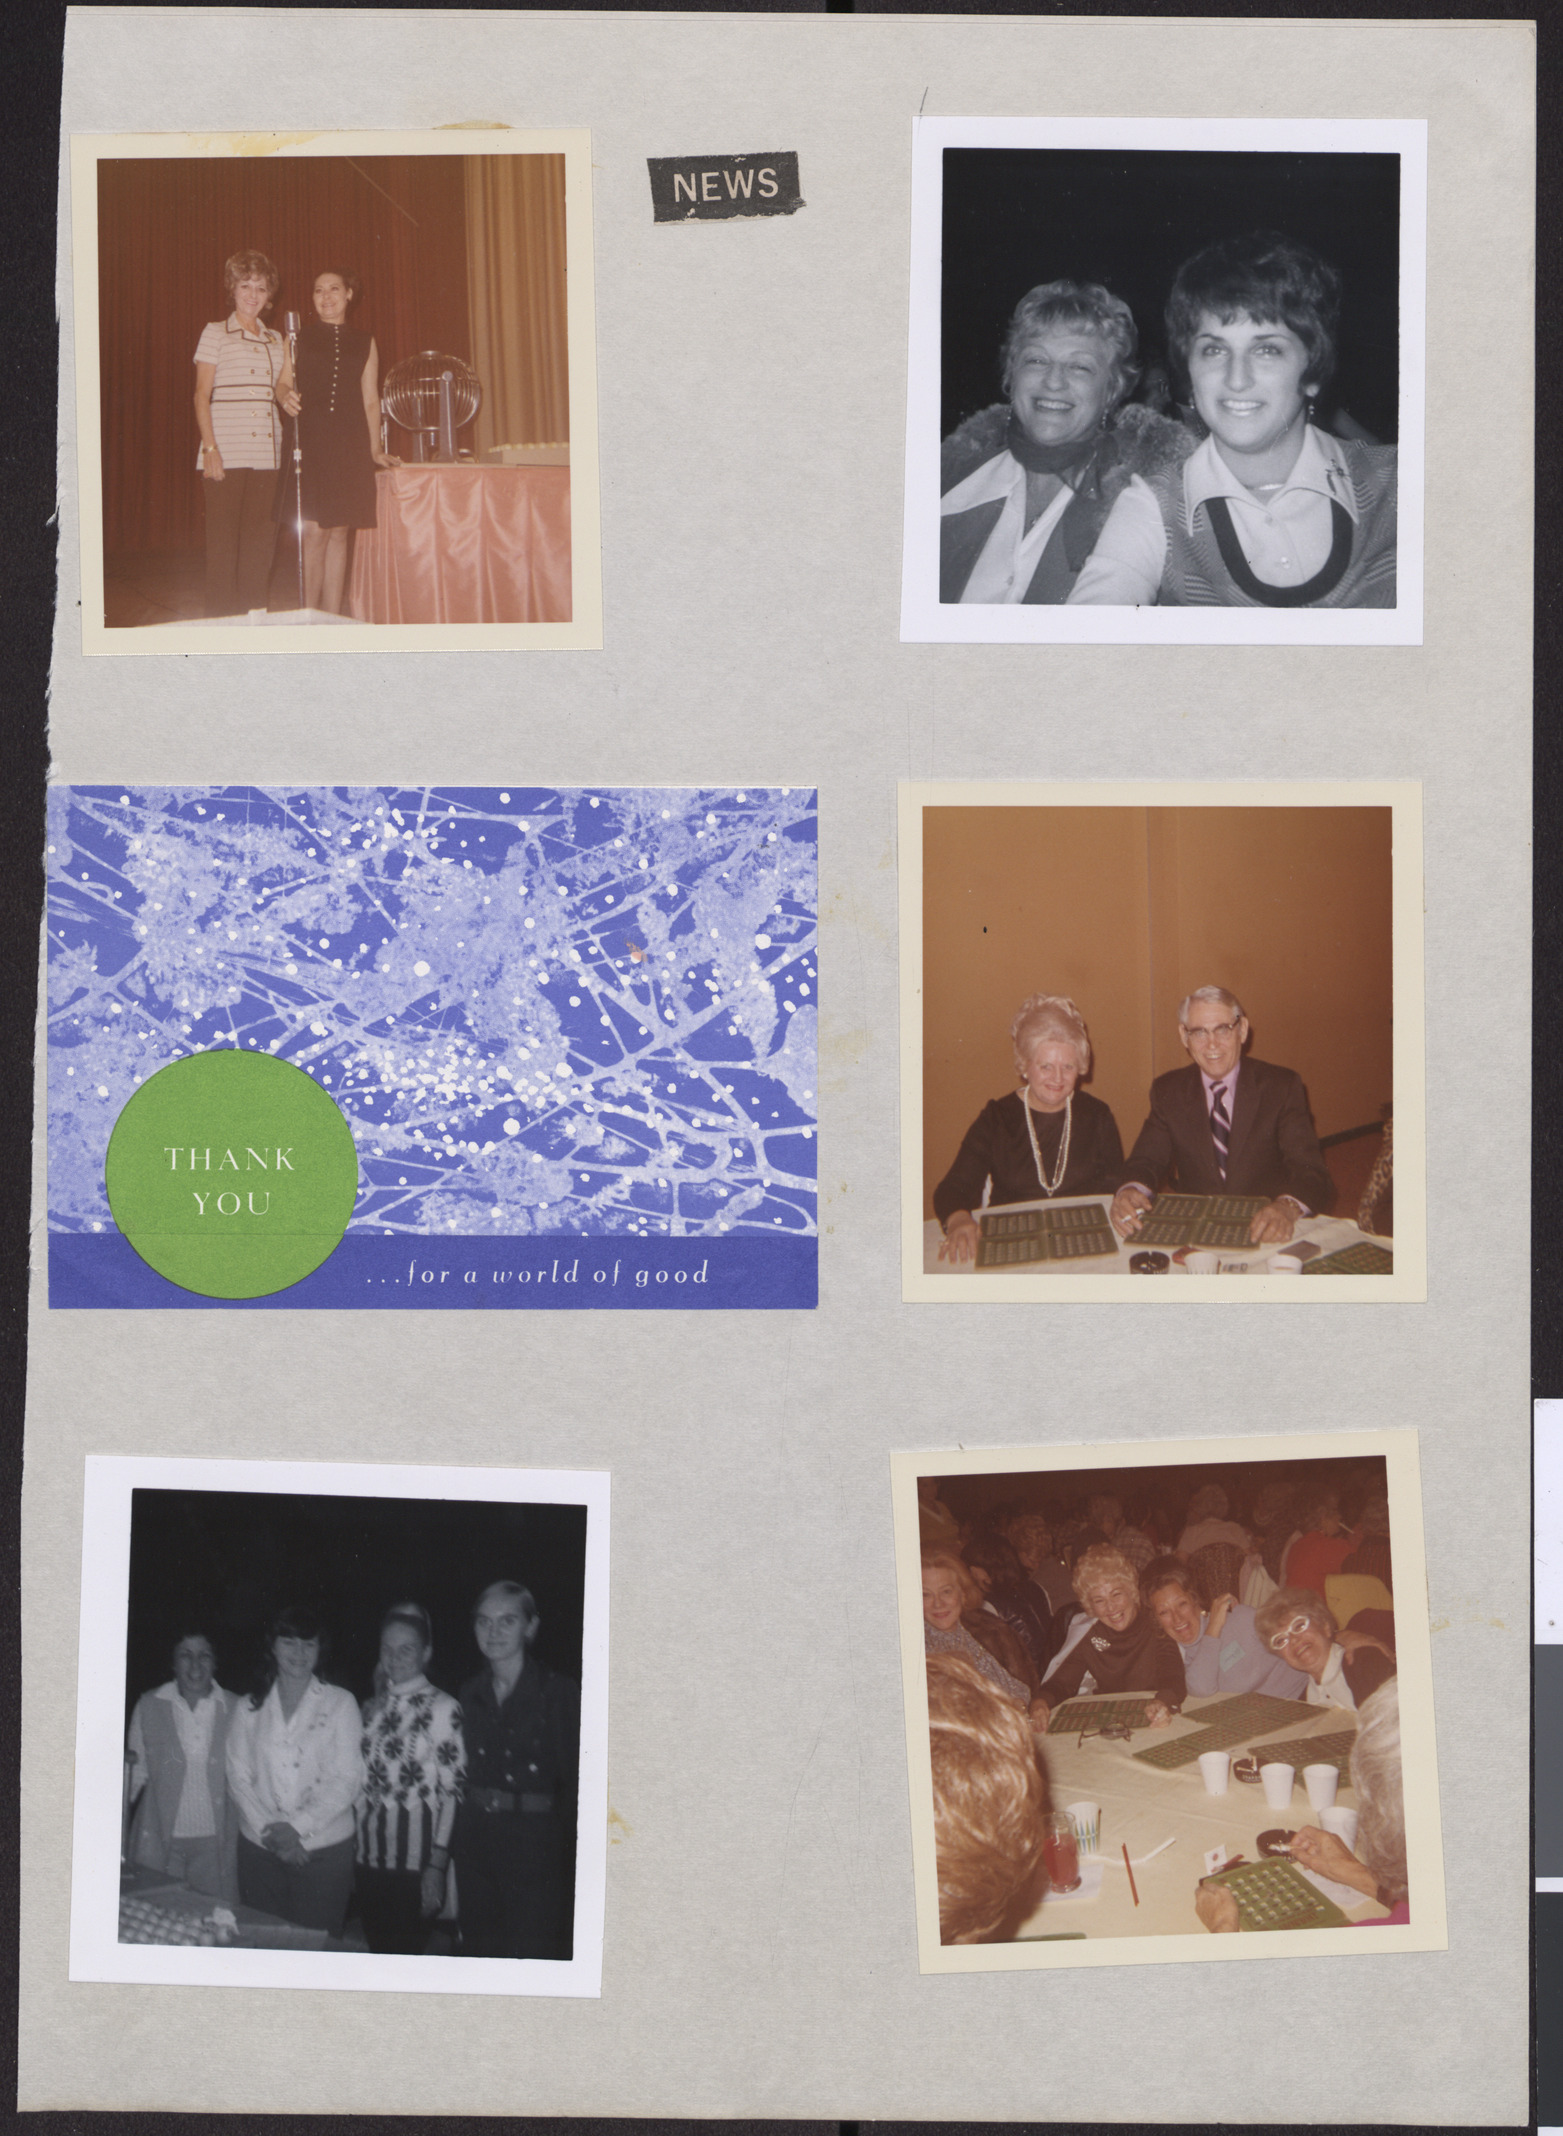 Photographs of Hadassah Bingo event and thank you note to Blanche Stein, date unknown